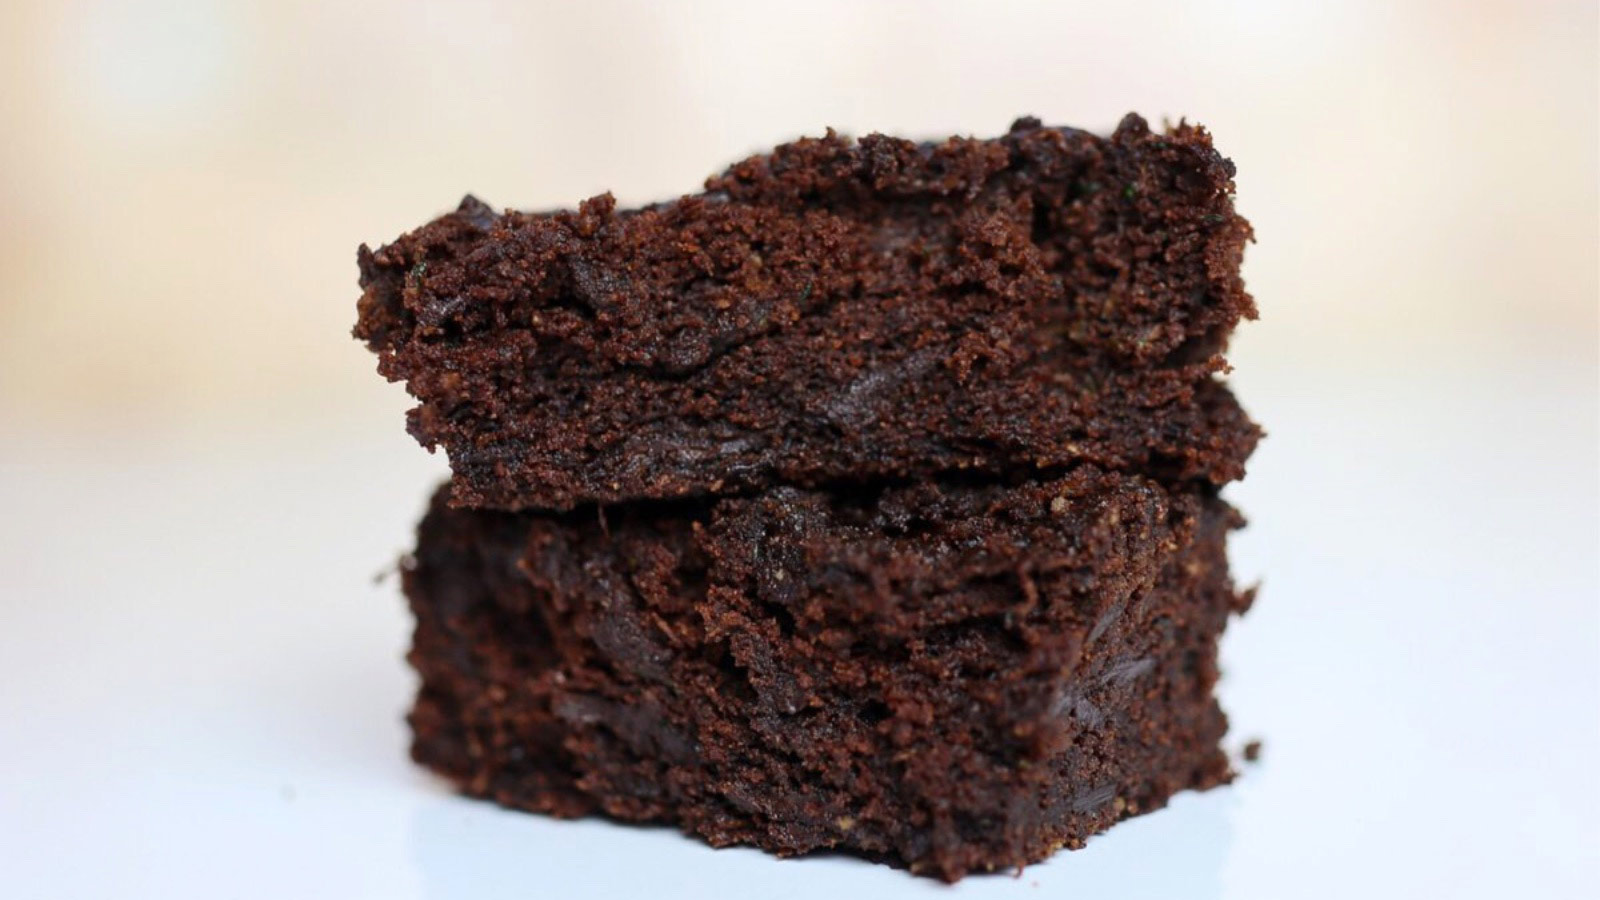 A stack of two brownies on a white background.